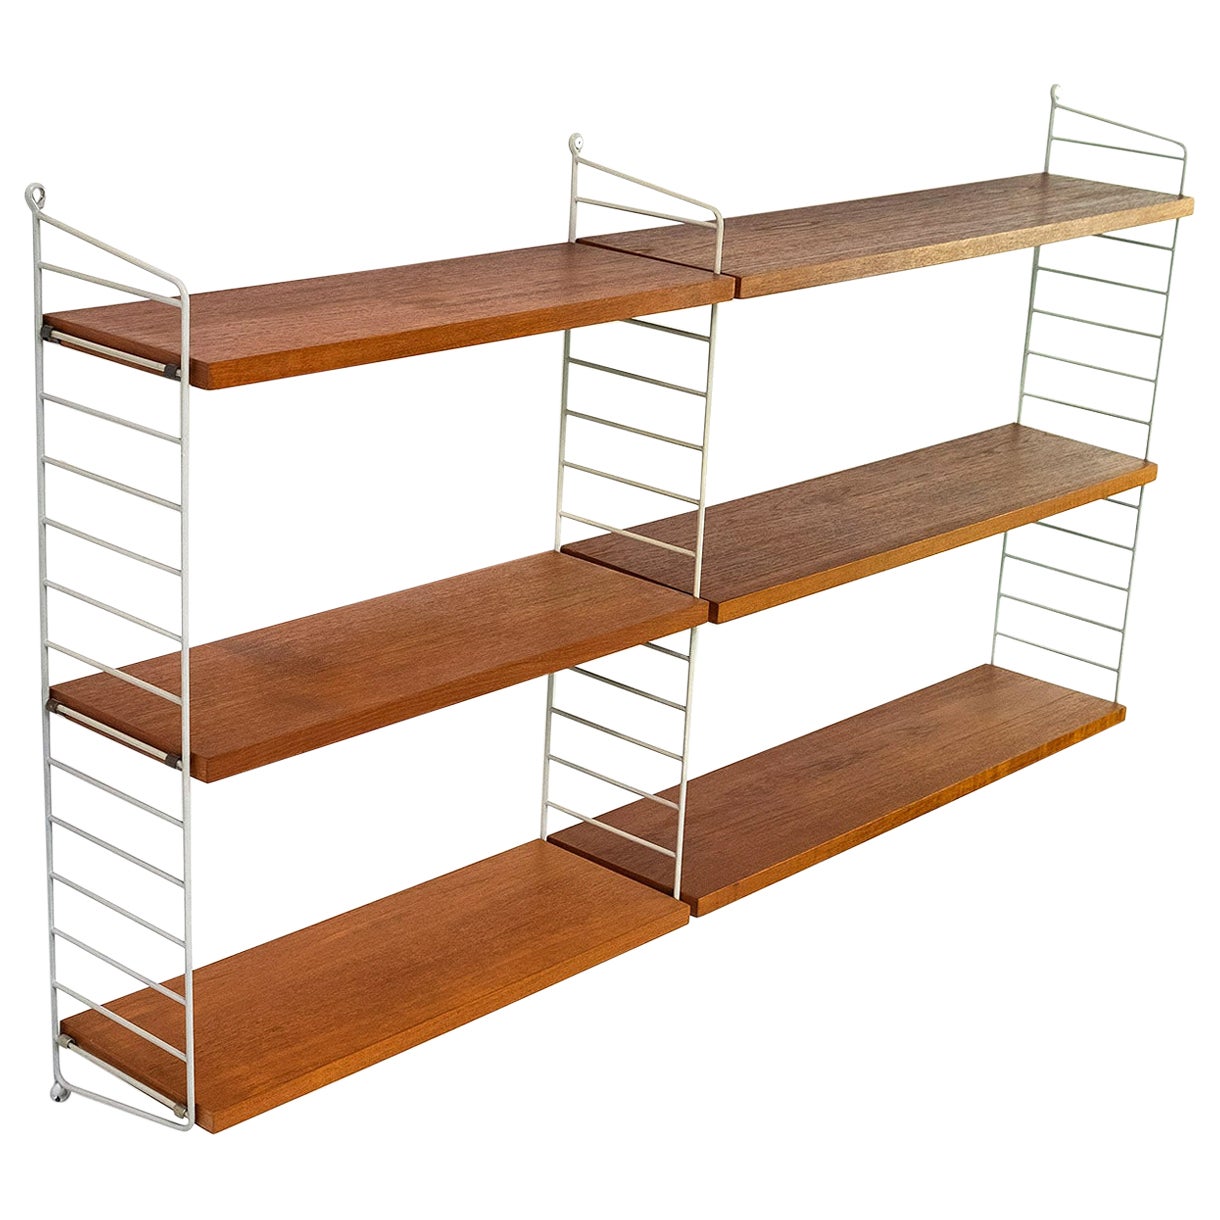 Teak String Wall Shelving System by Nisse Strinning